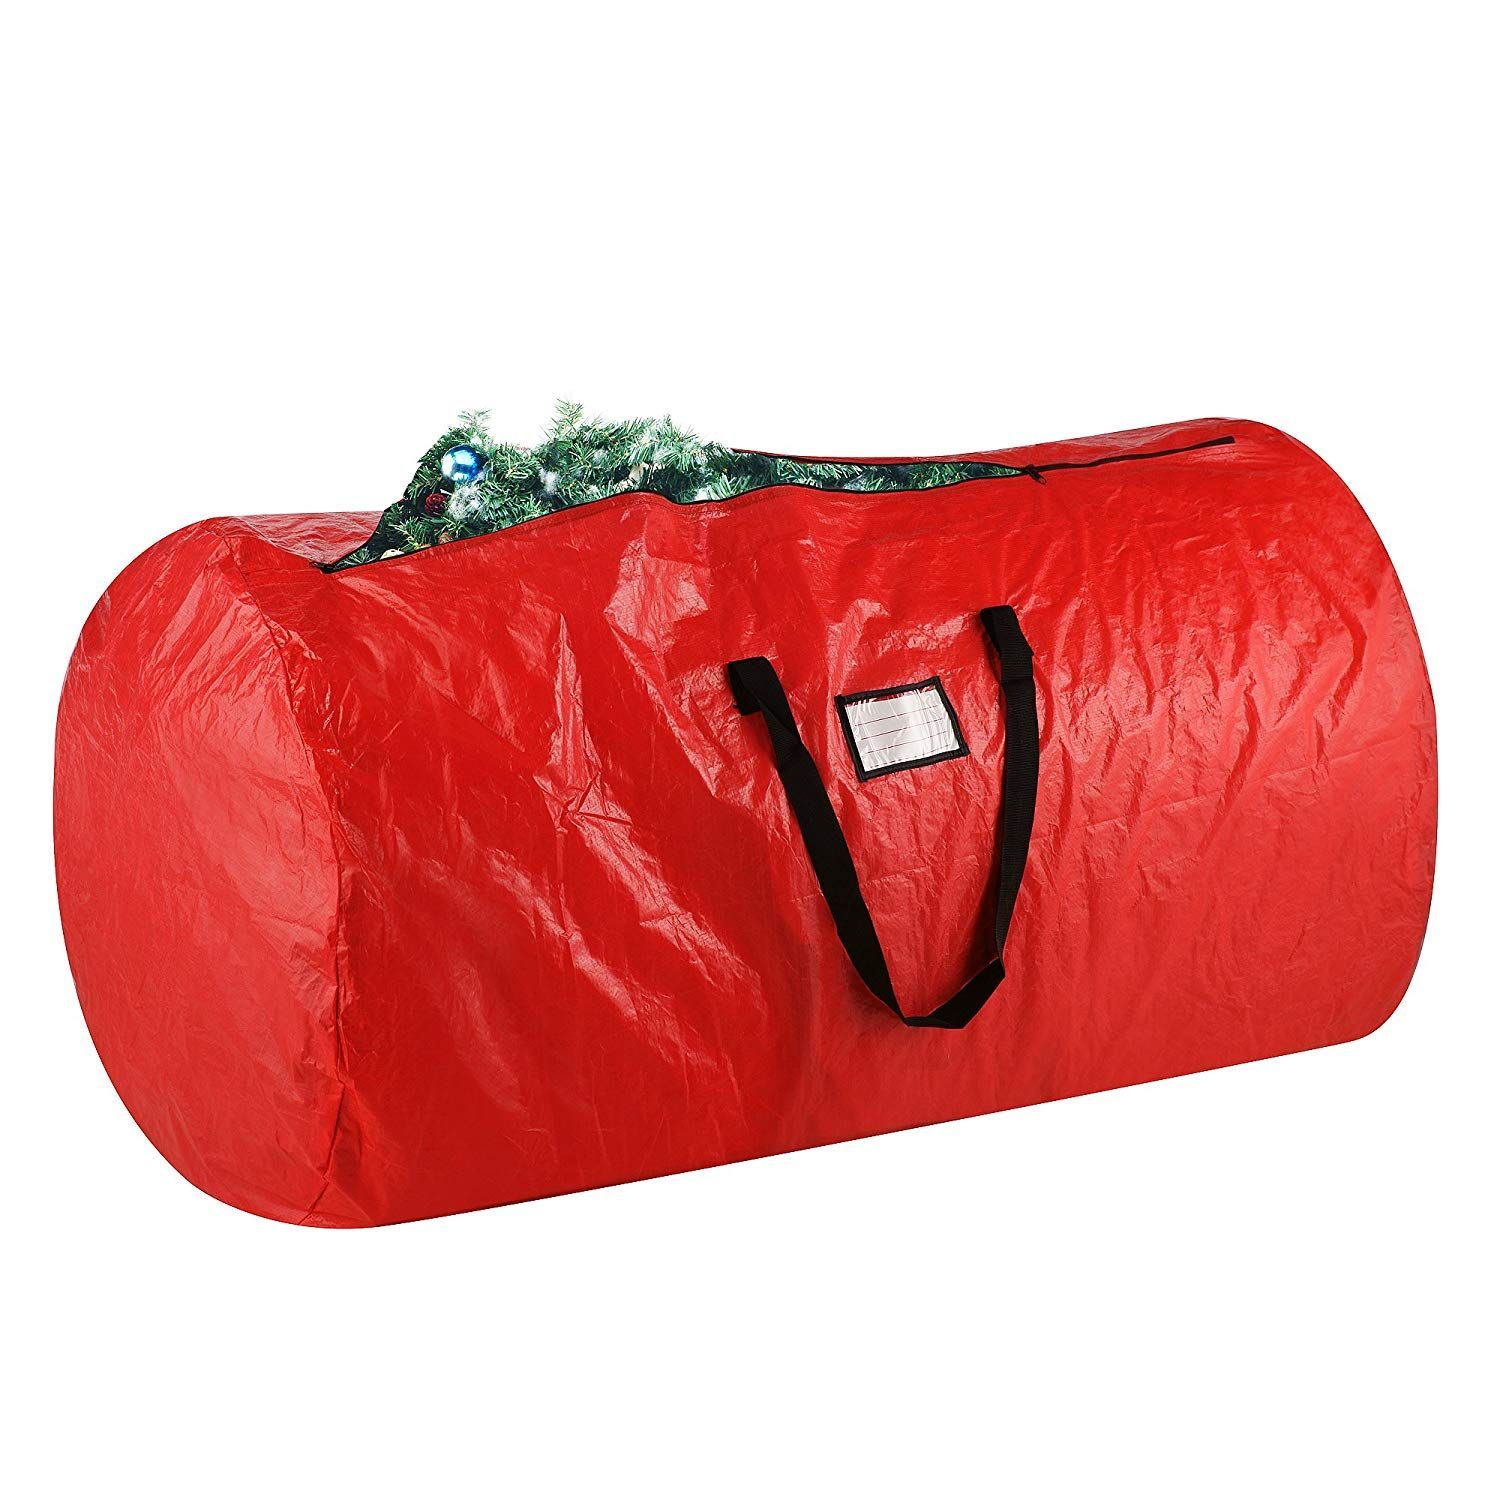 Elf Stor Deluxe Holiday Christmas Storage Bag